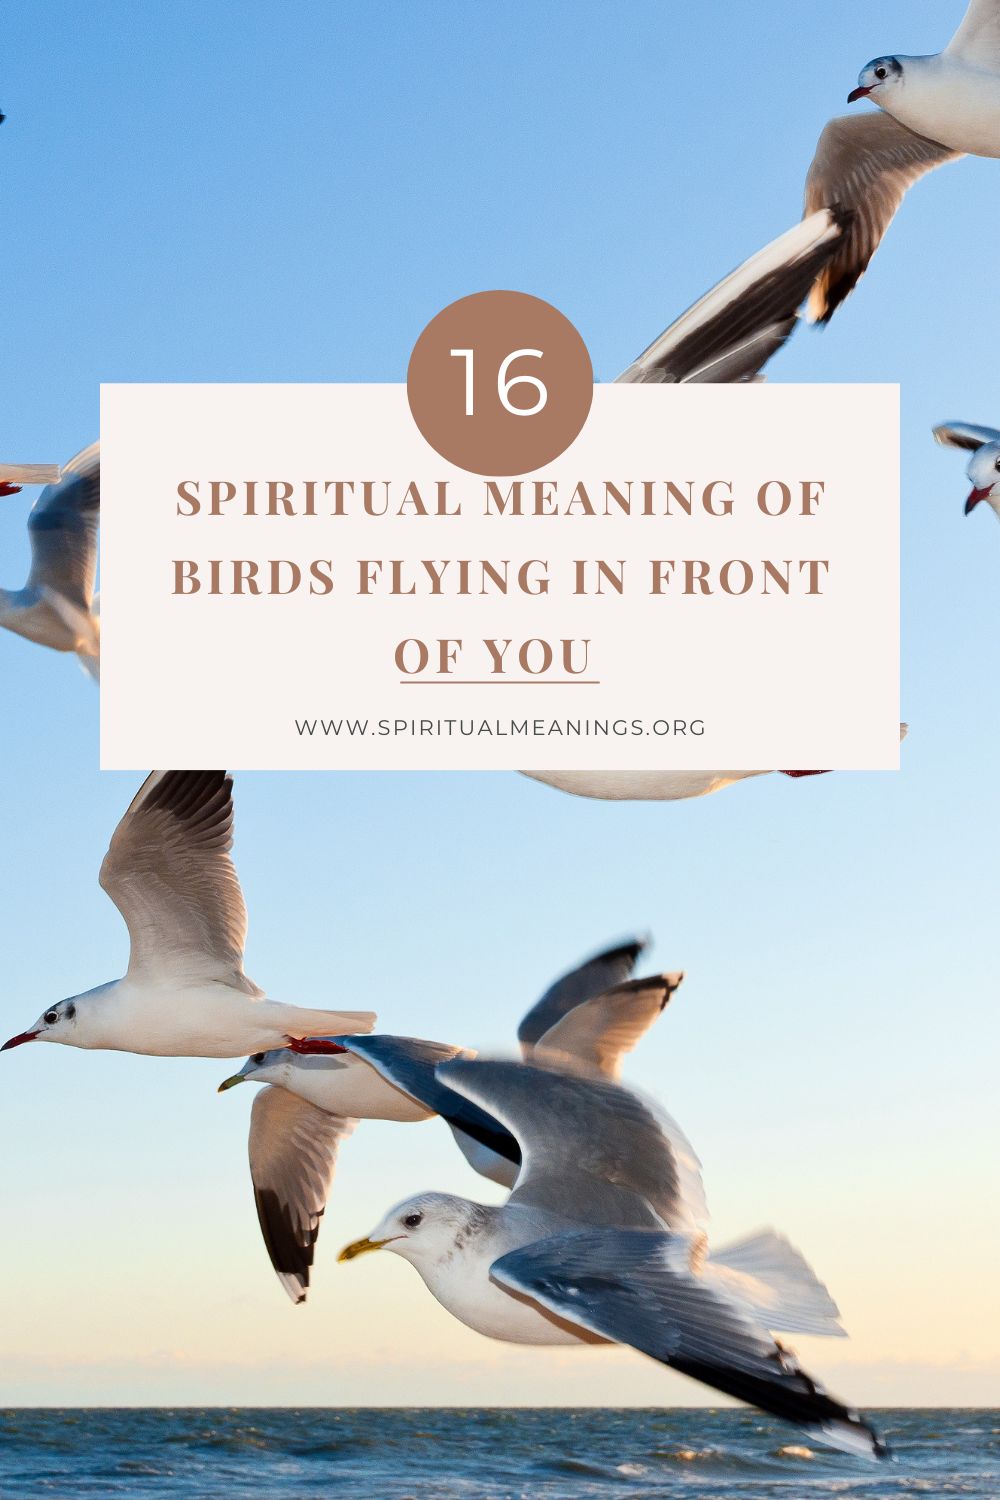 Many ways to interpret birds flying in front of you